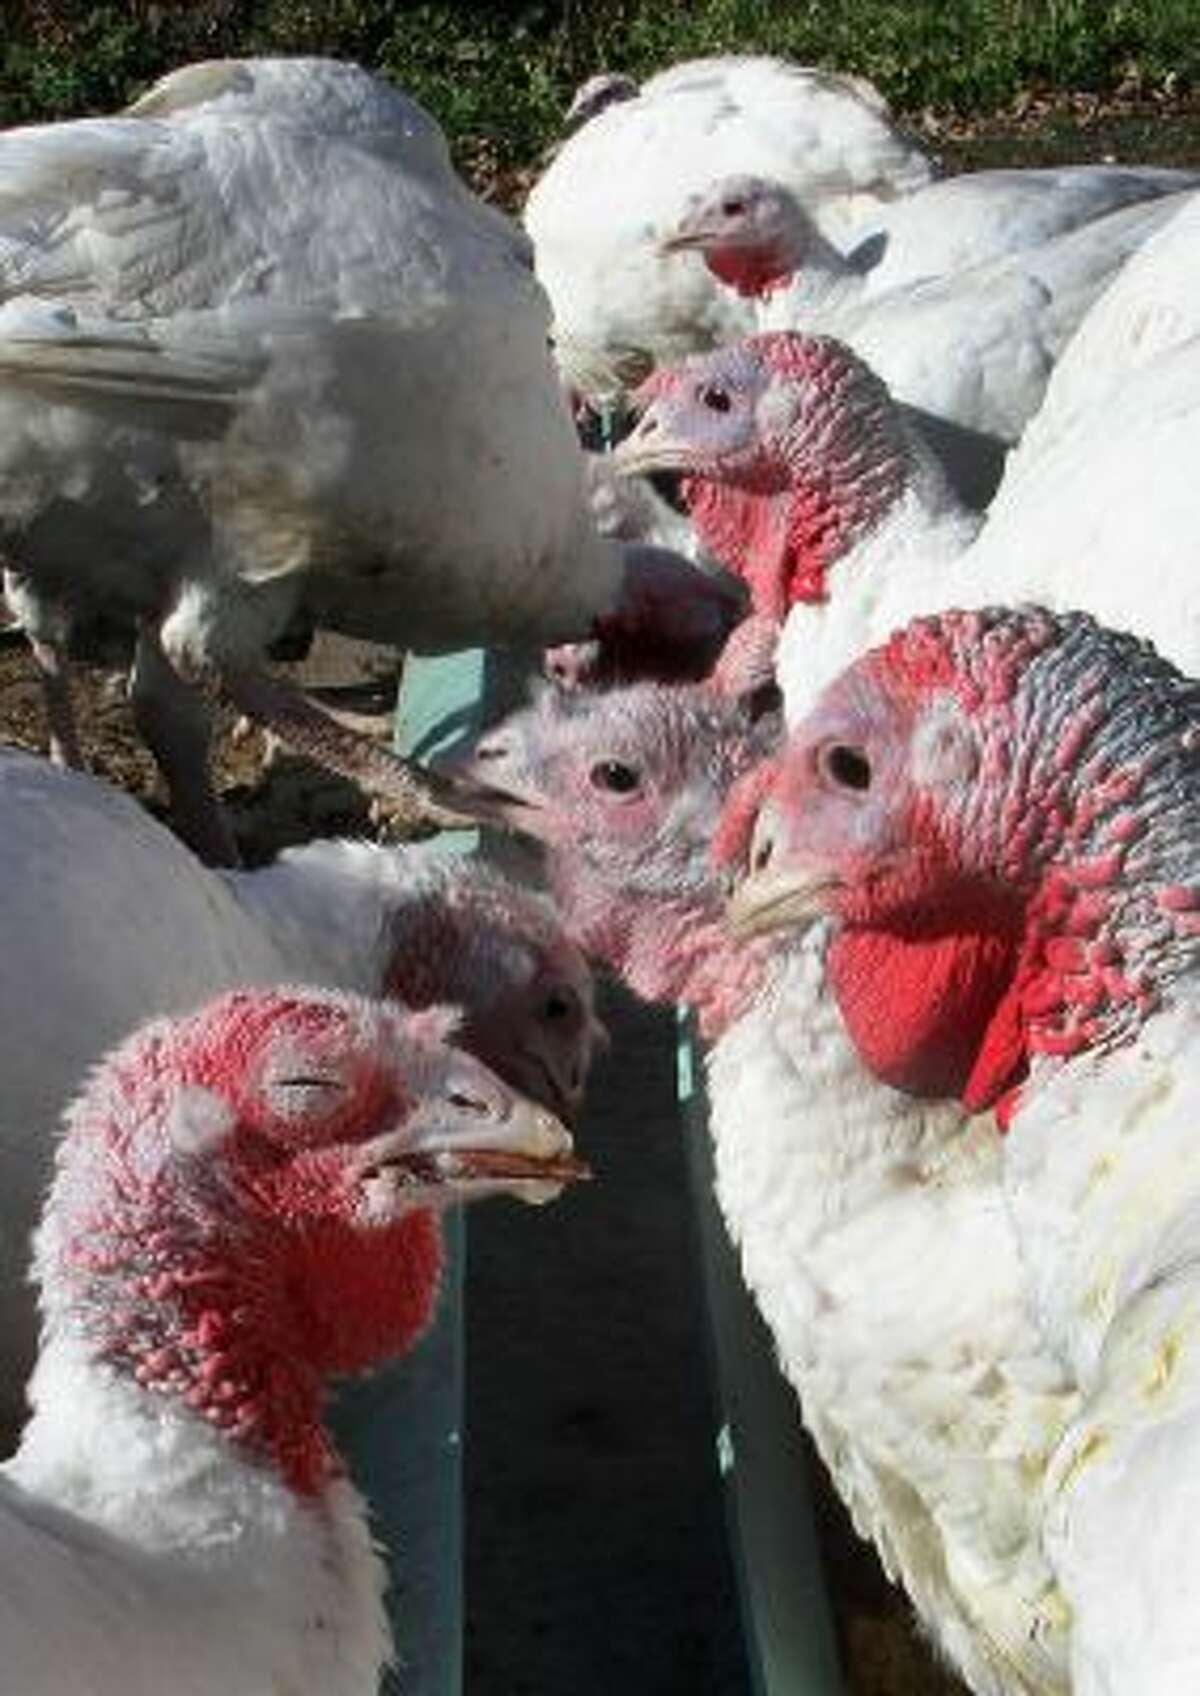 In this photo taken Tuesday, Oct. 29, 2013 turkeys are seen drinking beer from a trough at Joe Morette's farm in Henniker, N.H. Morette is raising about 50 turkeys and gives them beer every day and says it makes the birds fatter and more flavorful.